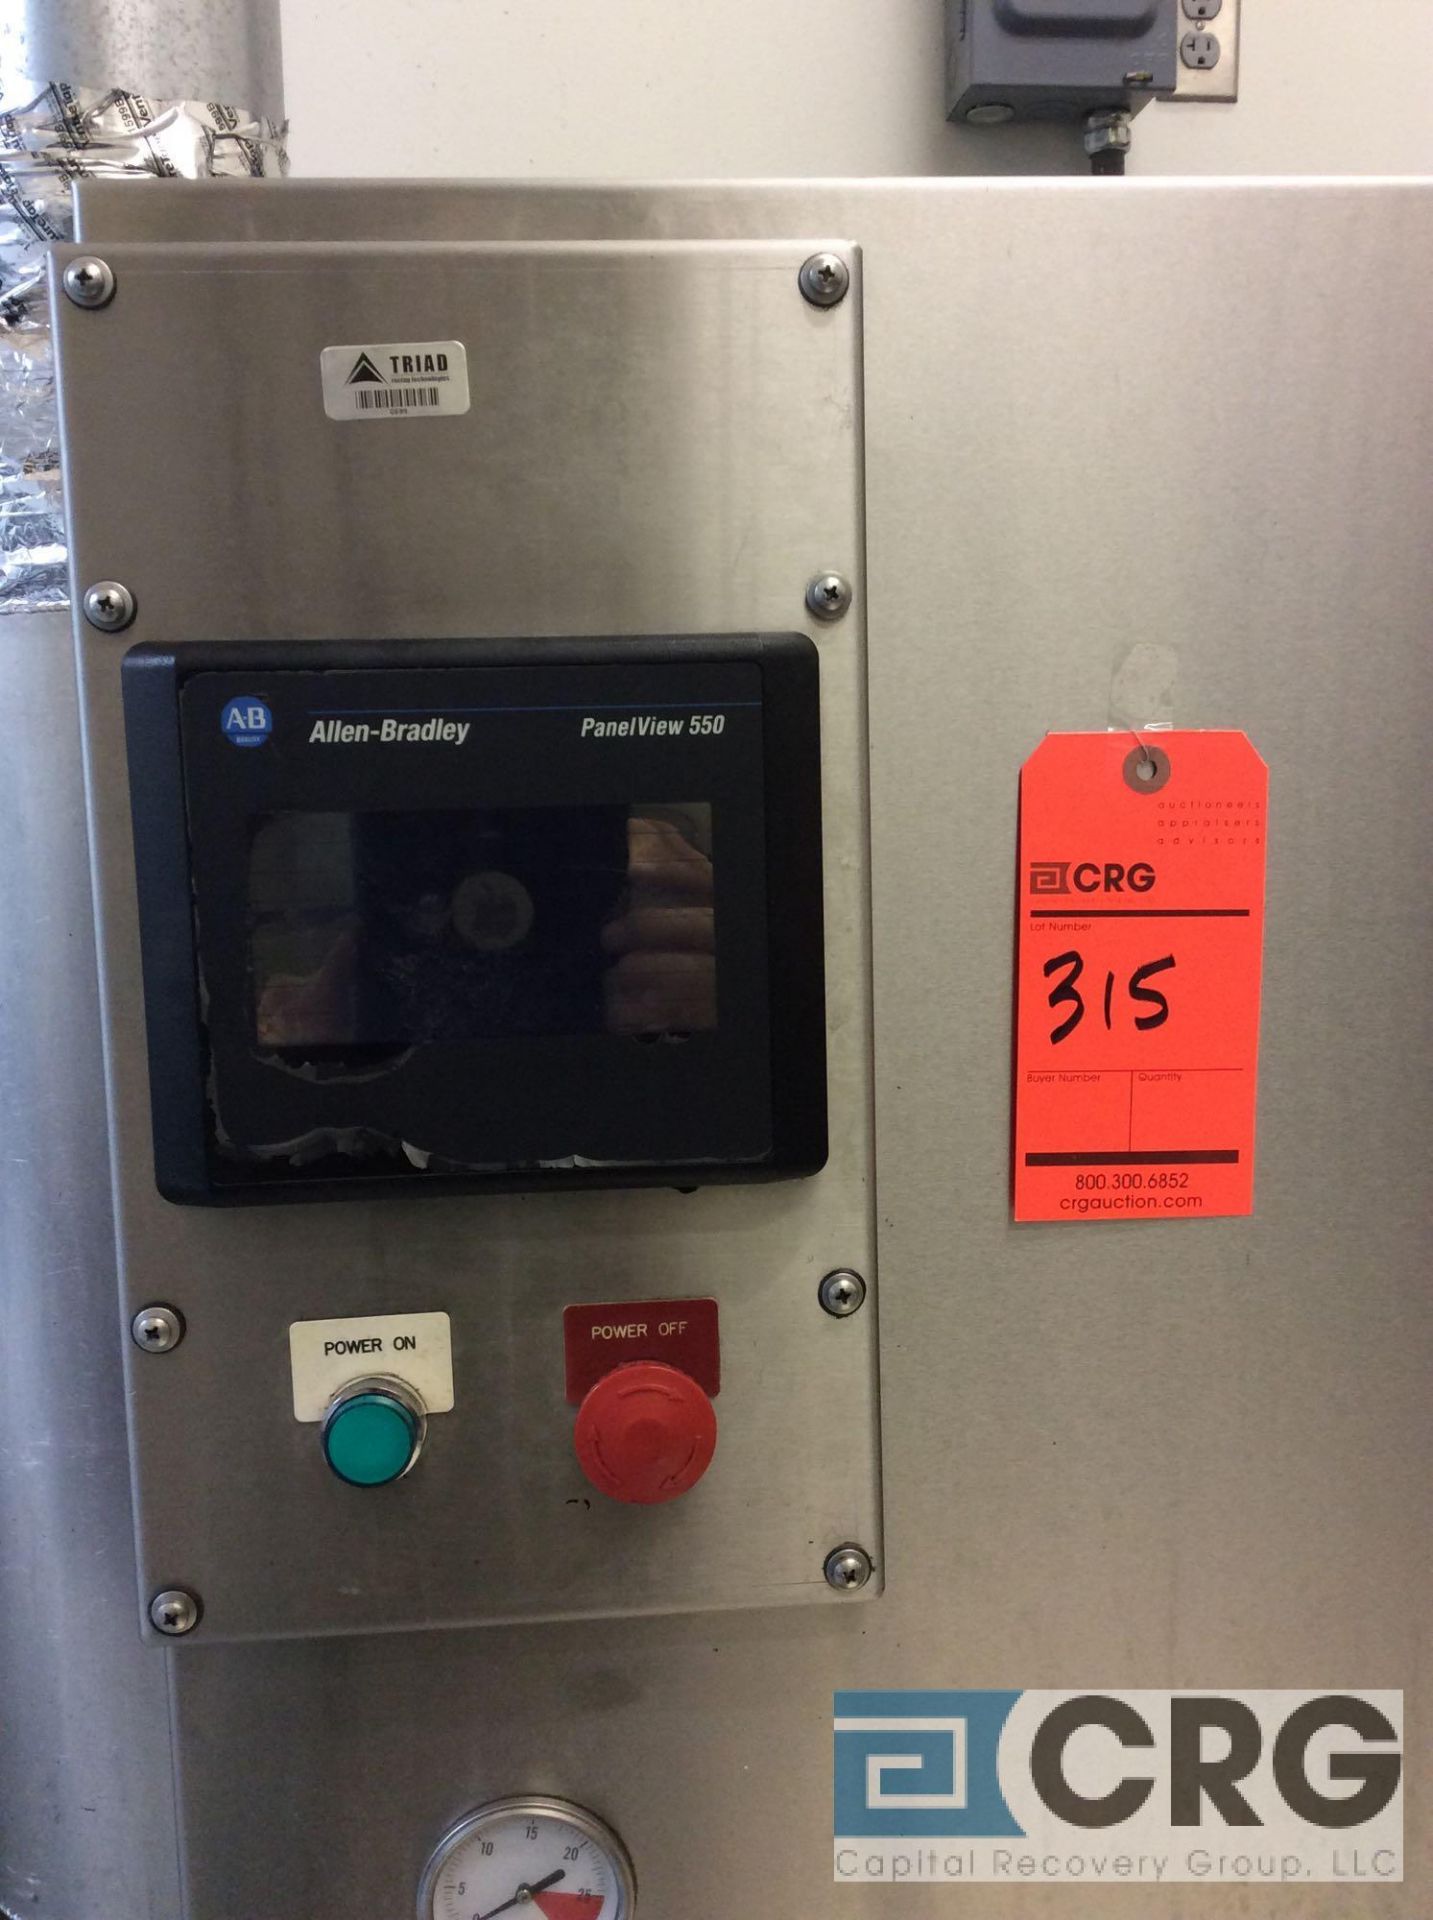 Safety Kleen stainless steel 26" x 42" ultrasonic parts washer with Allen Bradley panel view 550 - Image 2 of 2